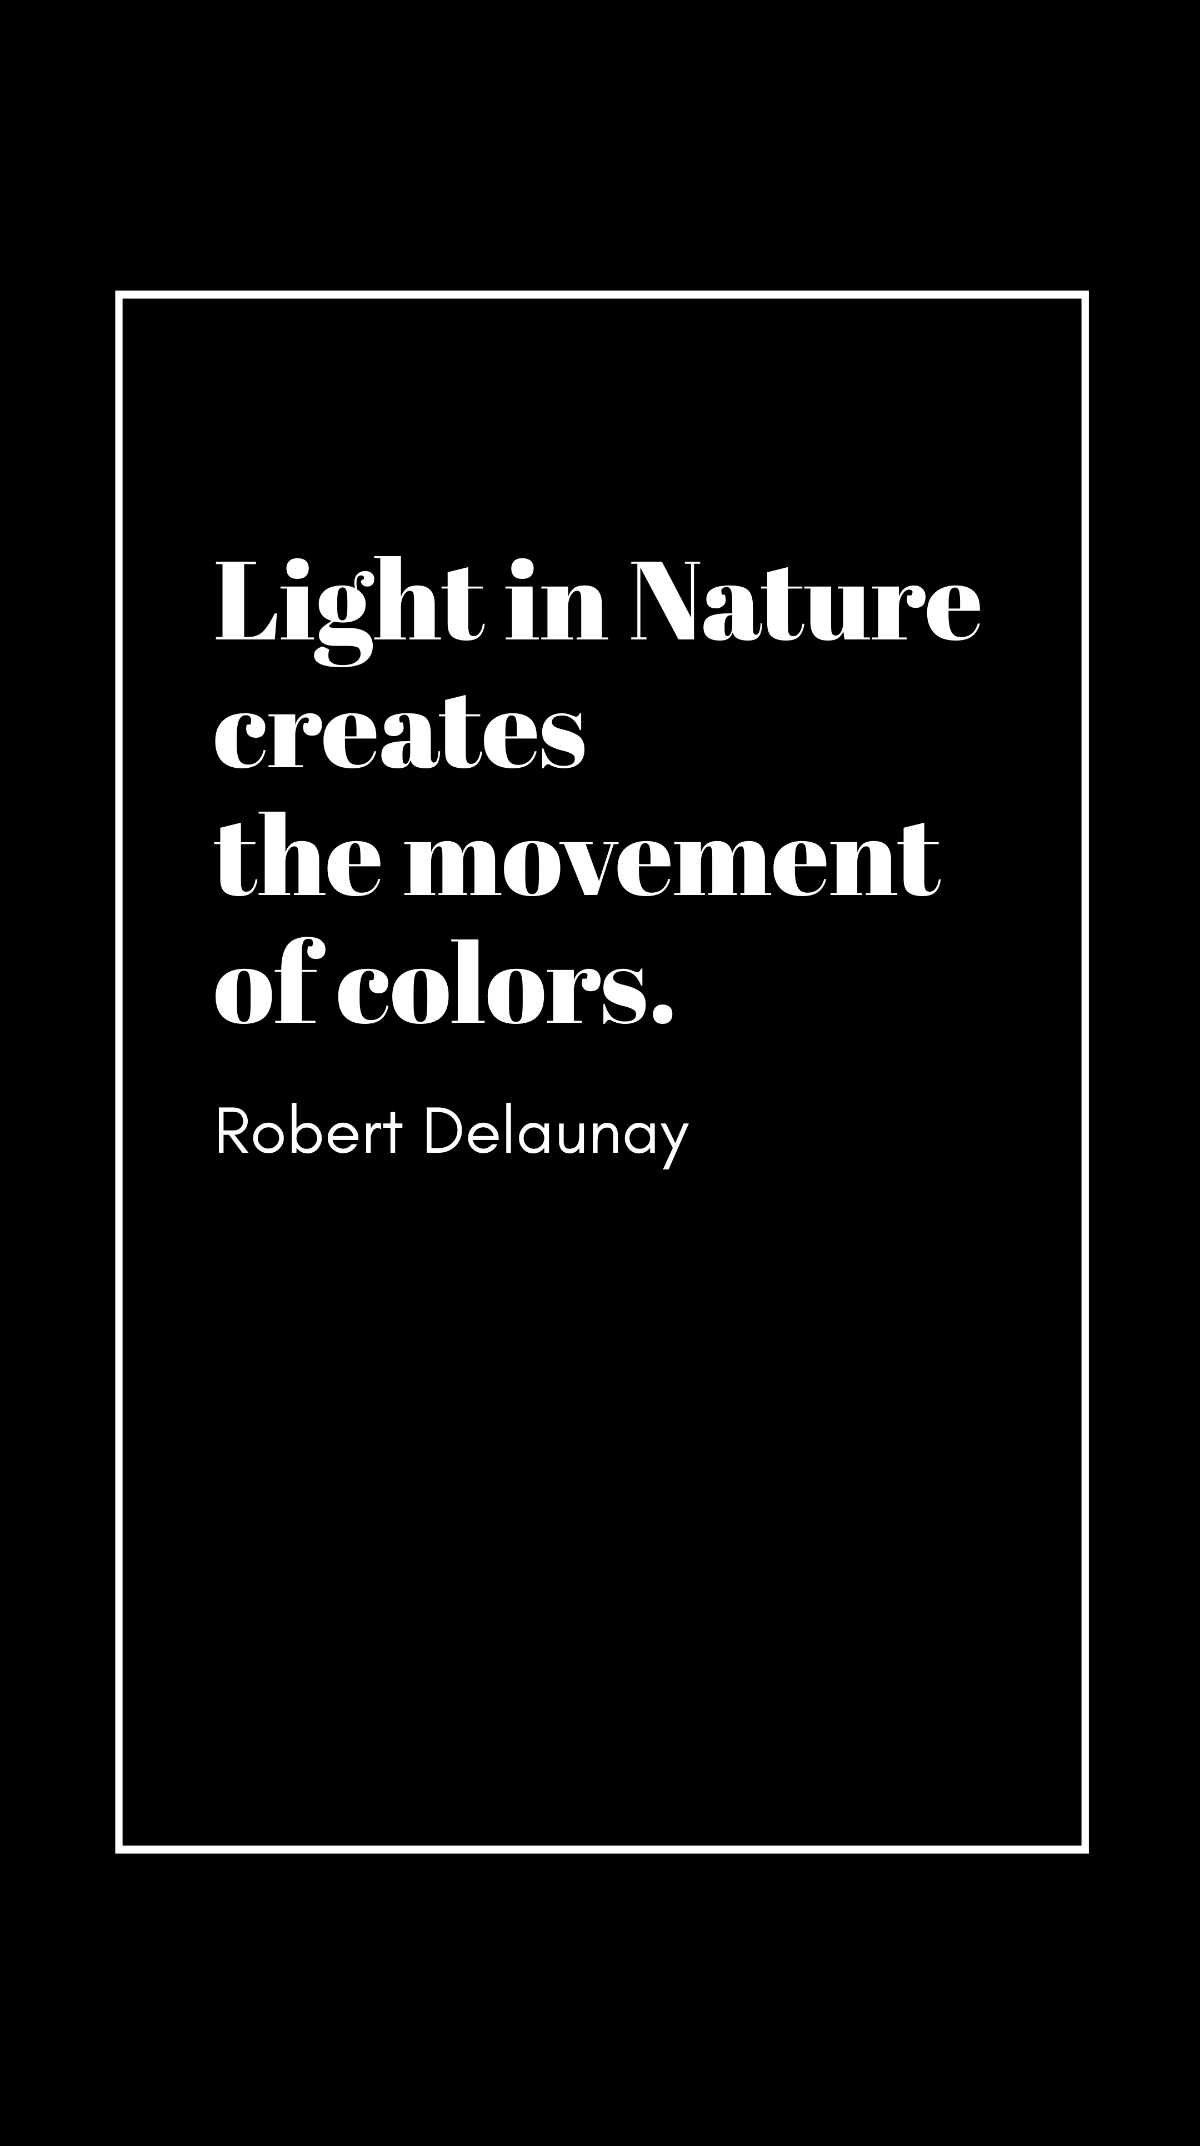 Robert Delaunay - Light in Nature creates the movement of colors. Template